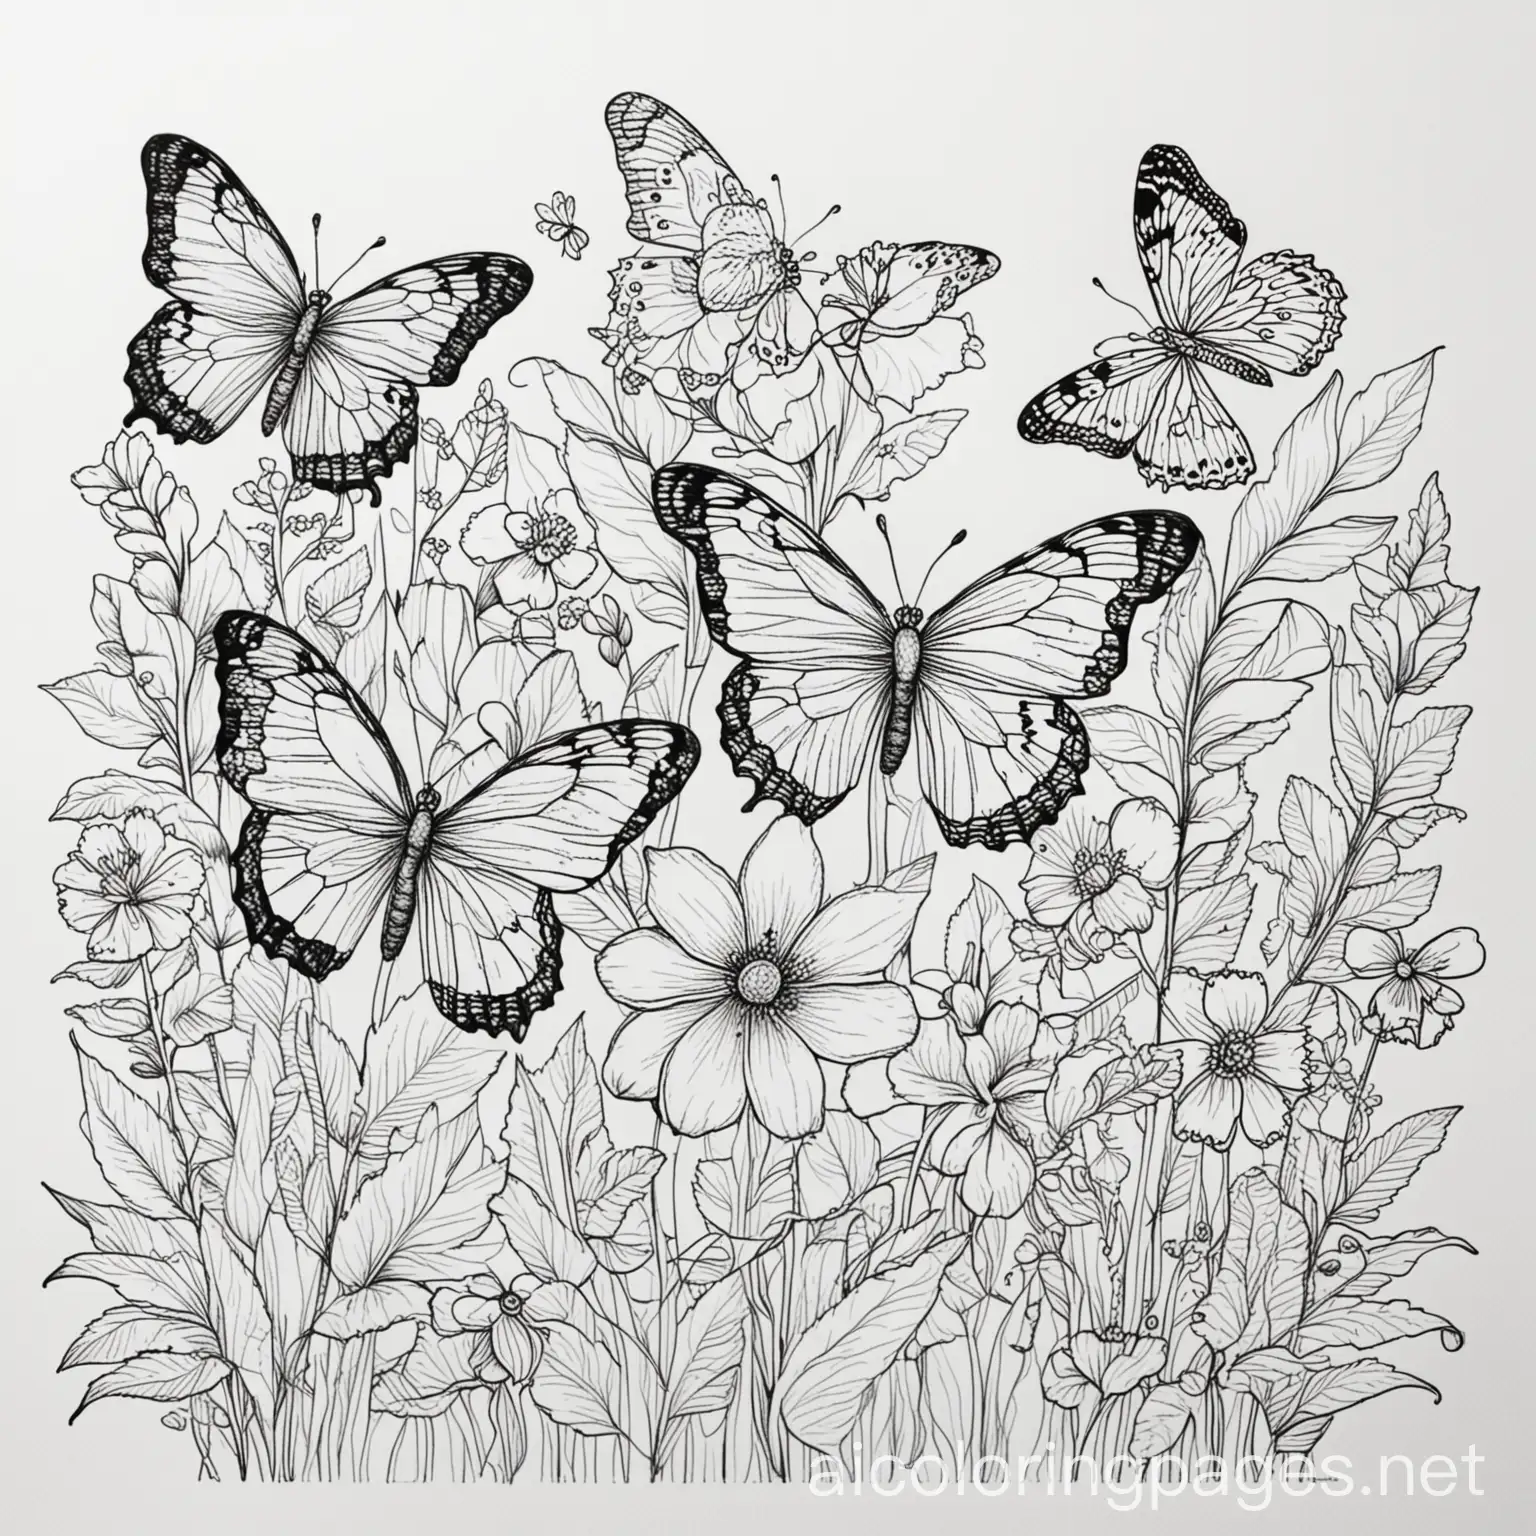 flowers with butterflies, Coloring Page, black and white, line art, white background, Simplicity, Ample White Space. The background of the coloring page is plain white to make it easy for young children to color within the lines. The outlines of all the subjects are easy to distinguish, making it simple for kids to color without too much difficulty